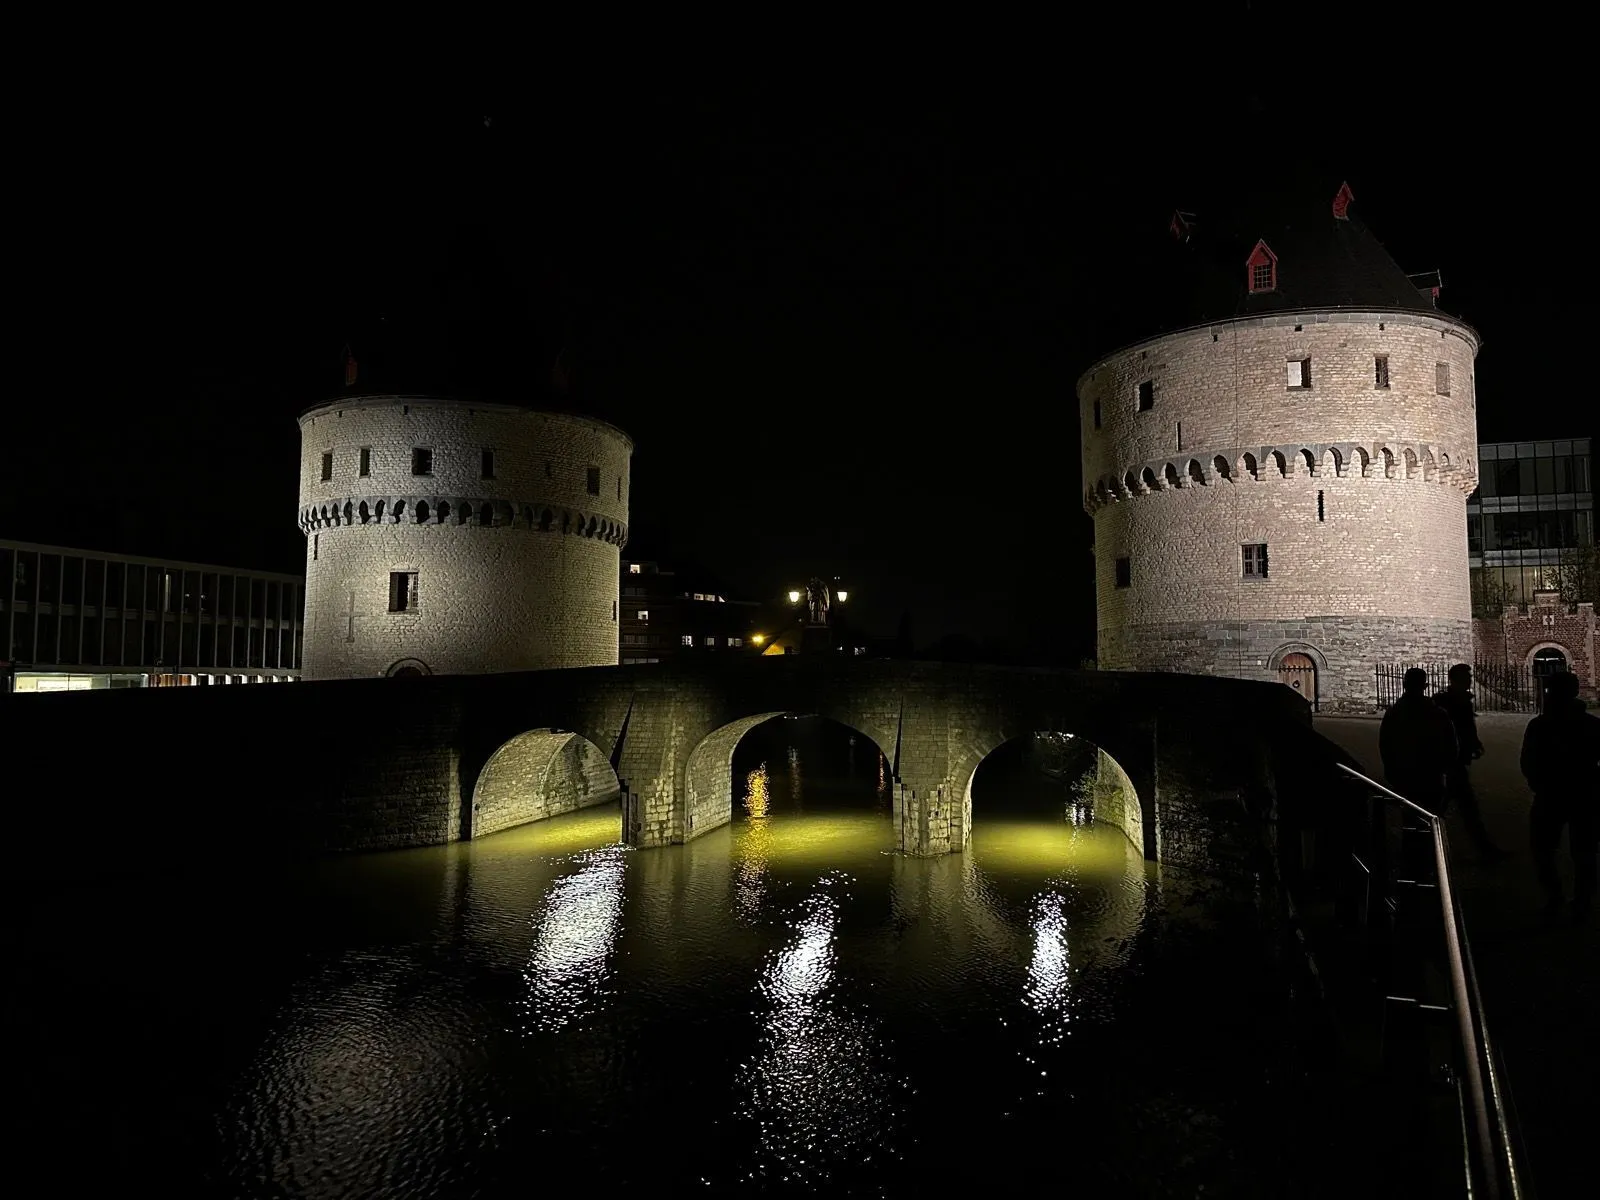 Two towers on either side of an arched bridge. 